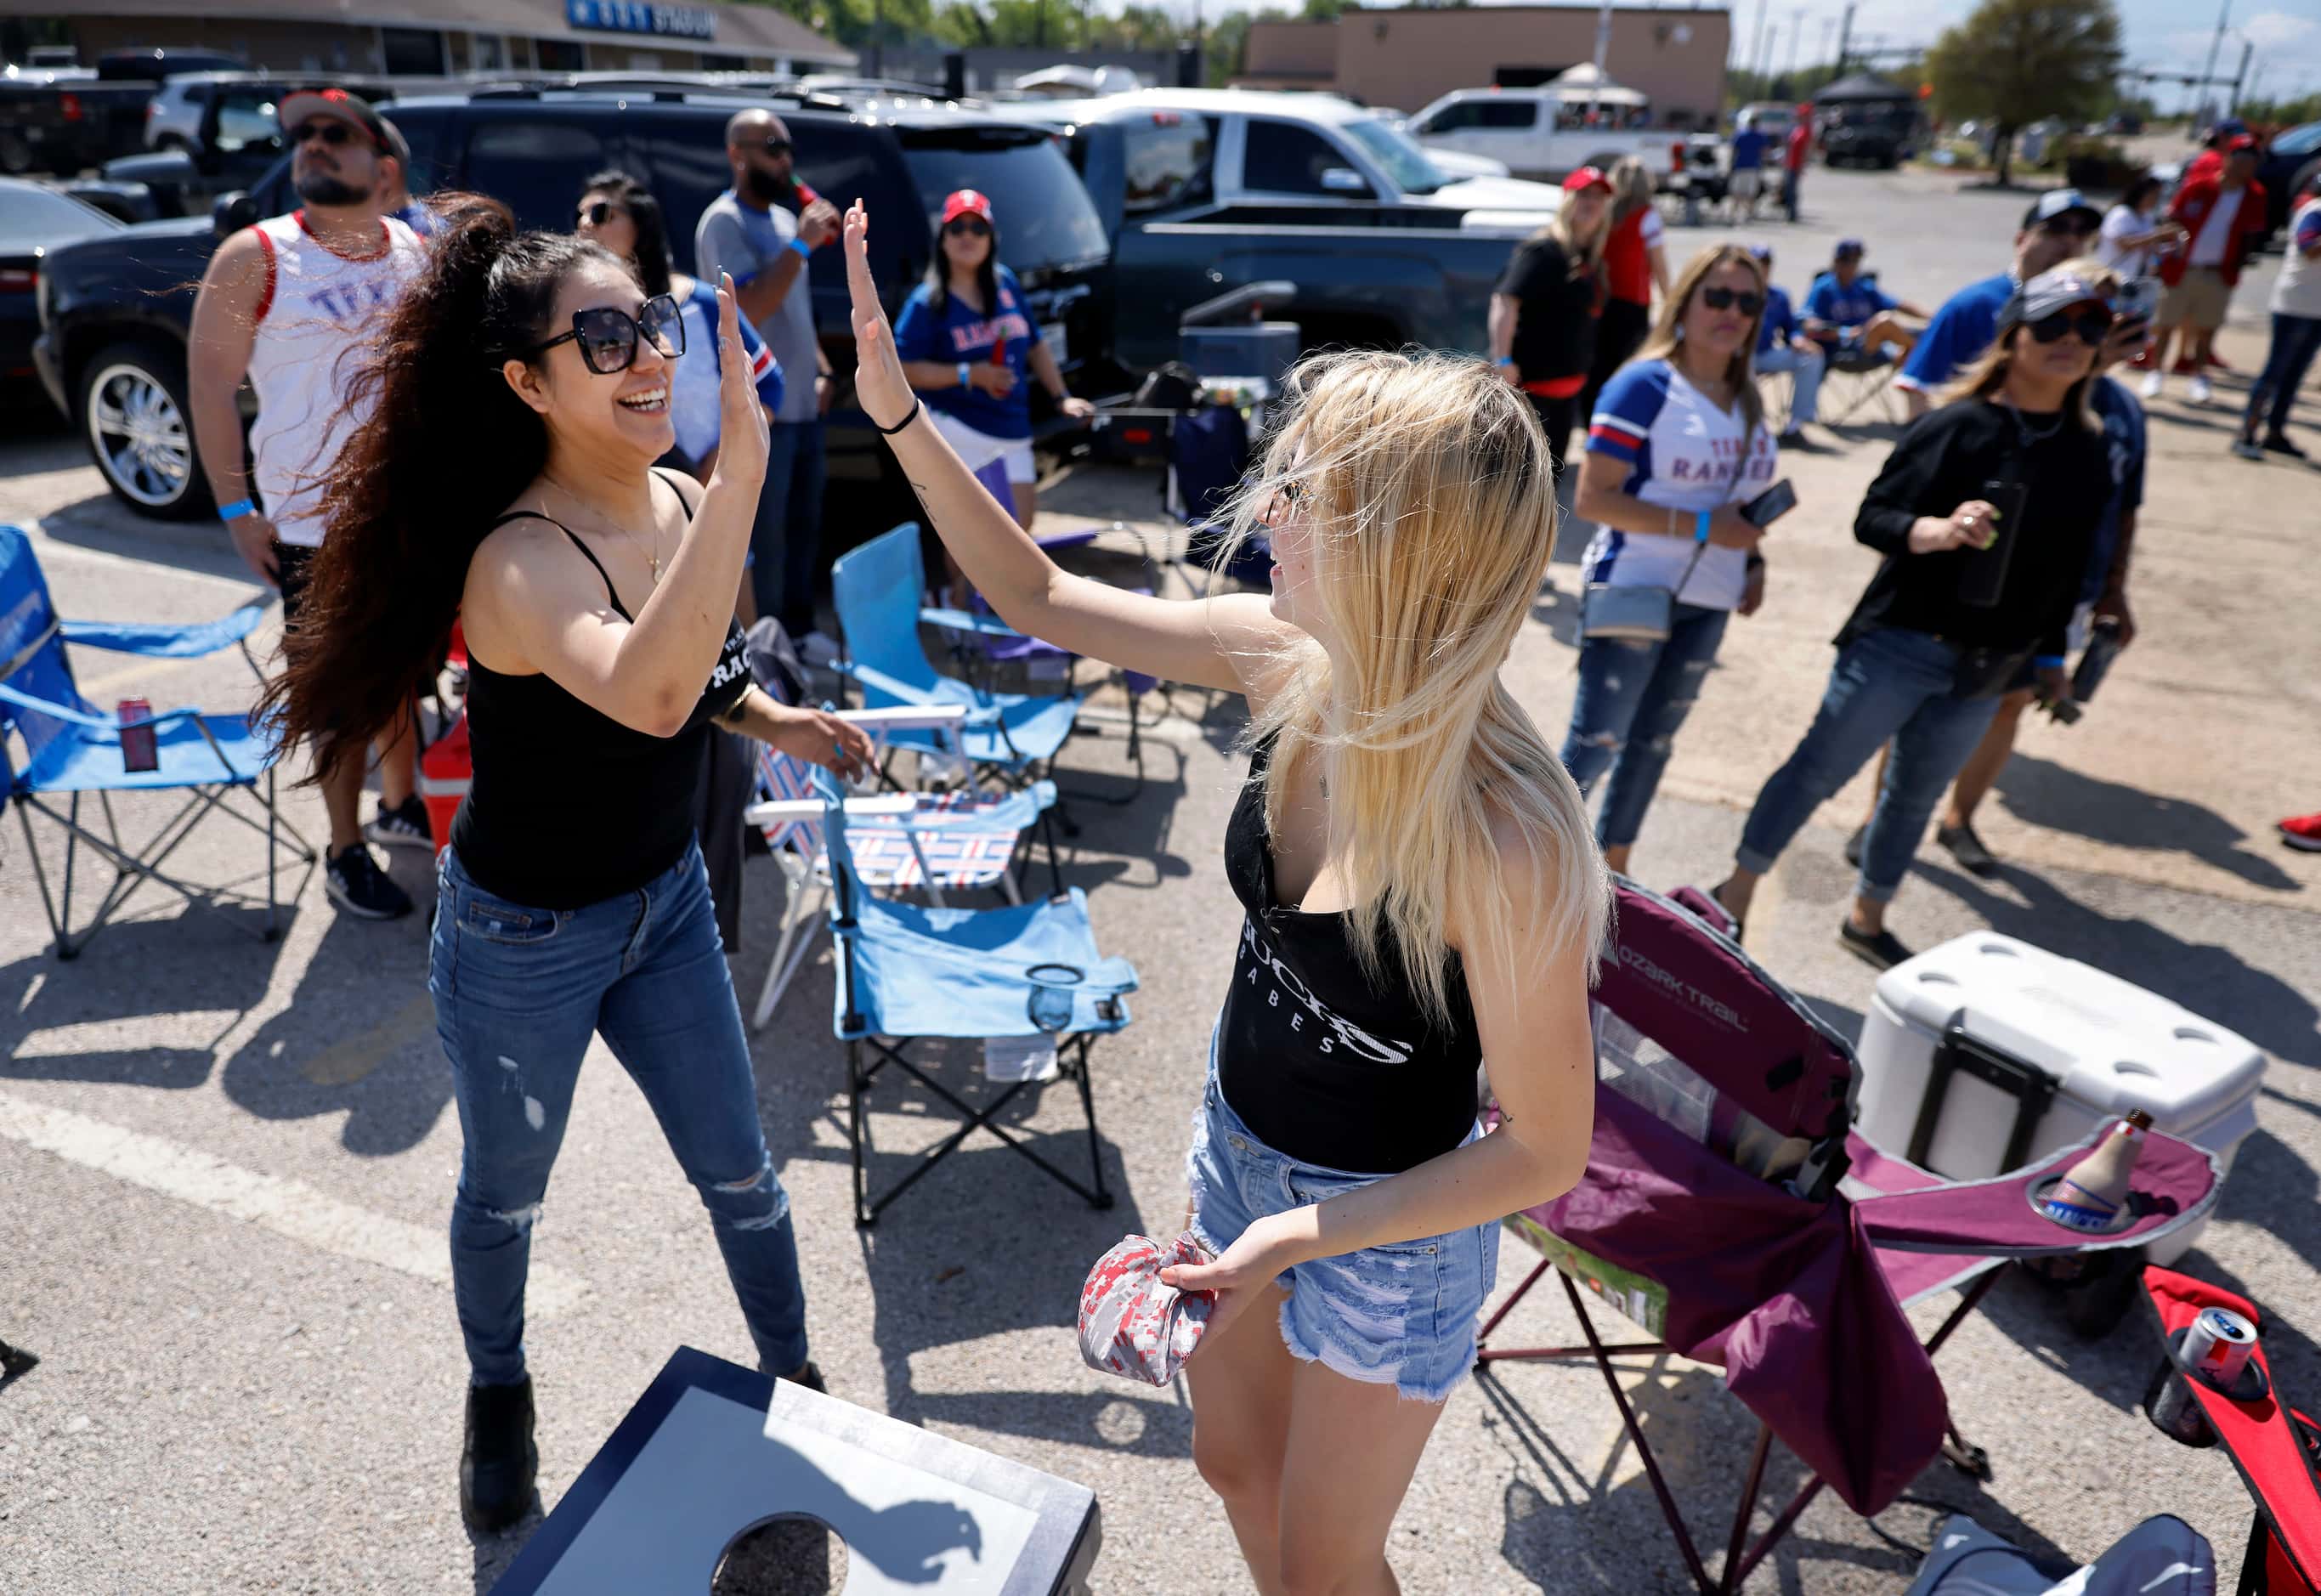 Texas Rangers fans Lola Martinez (left) and Kaylee Benson high five after they scored on a...